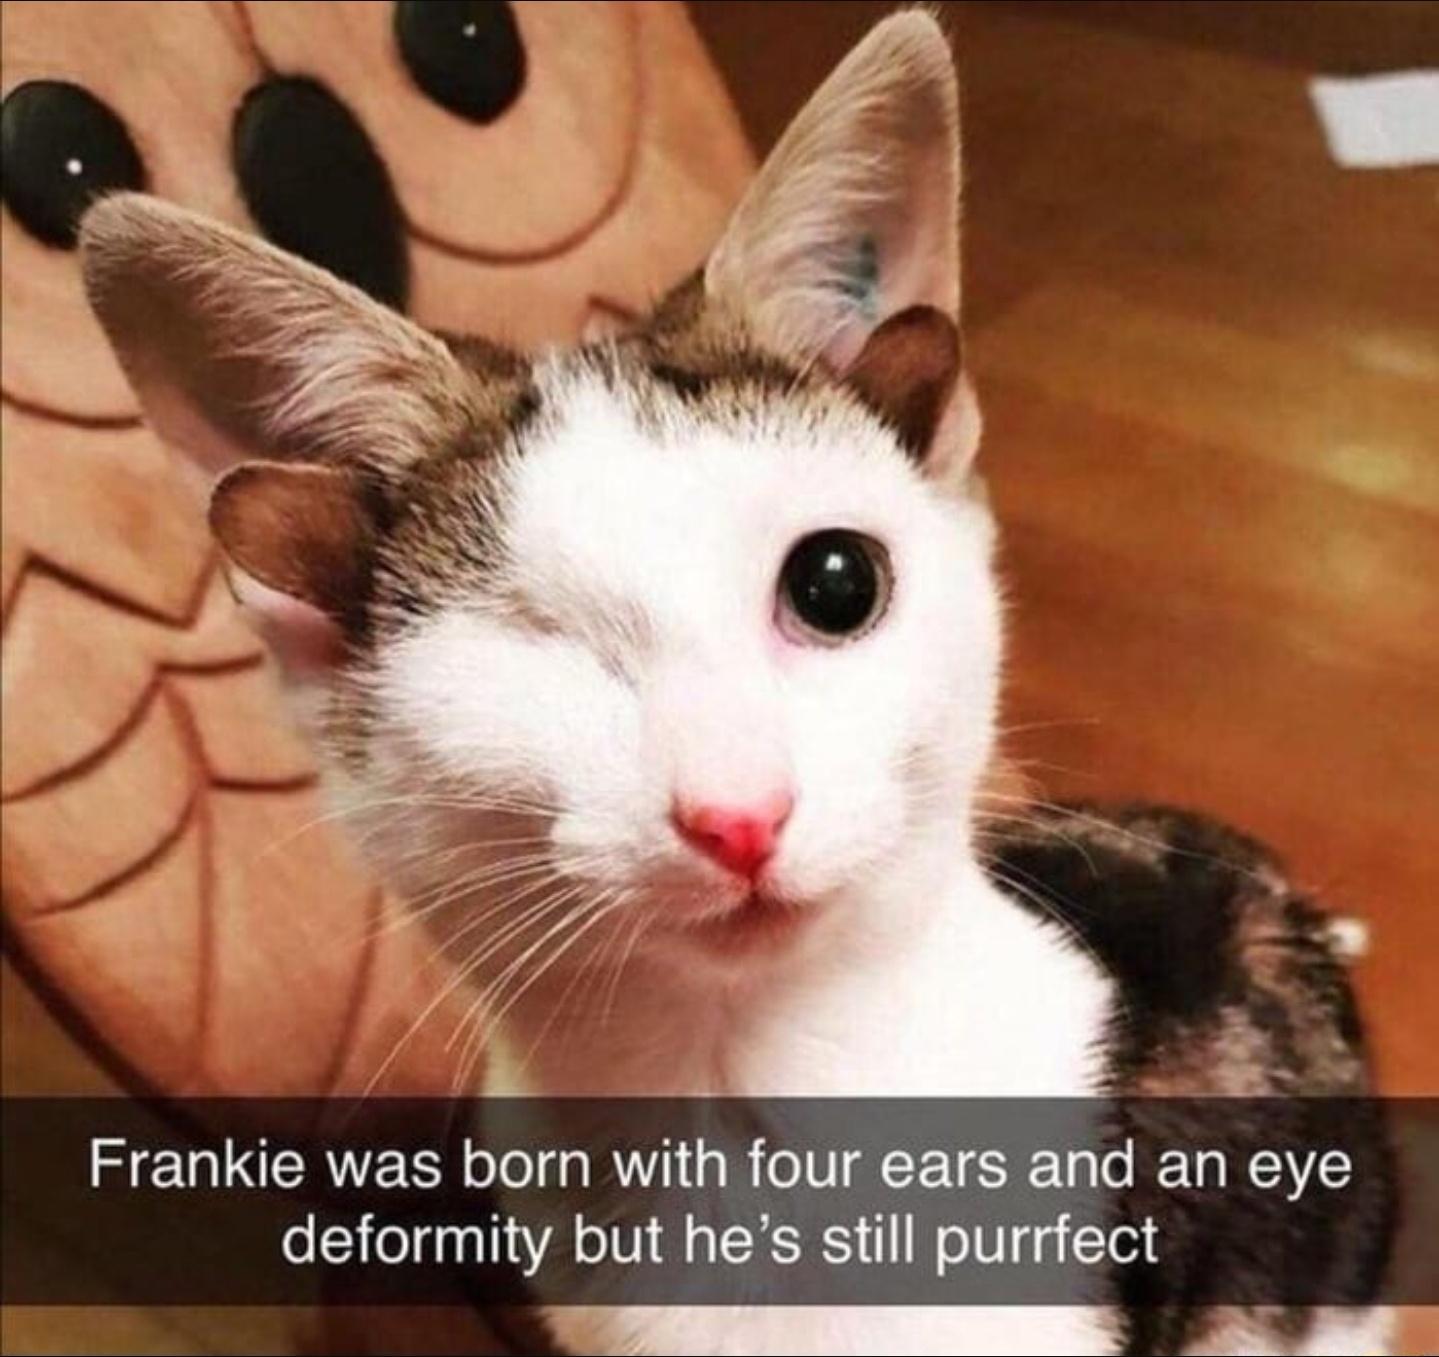 cat born with 4 ears - Frankie was born with four ears and an eye deformity but he's still purrfect